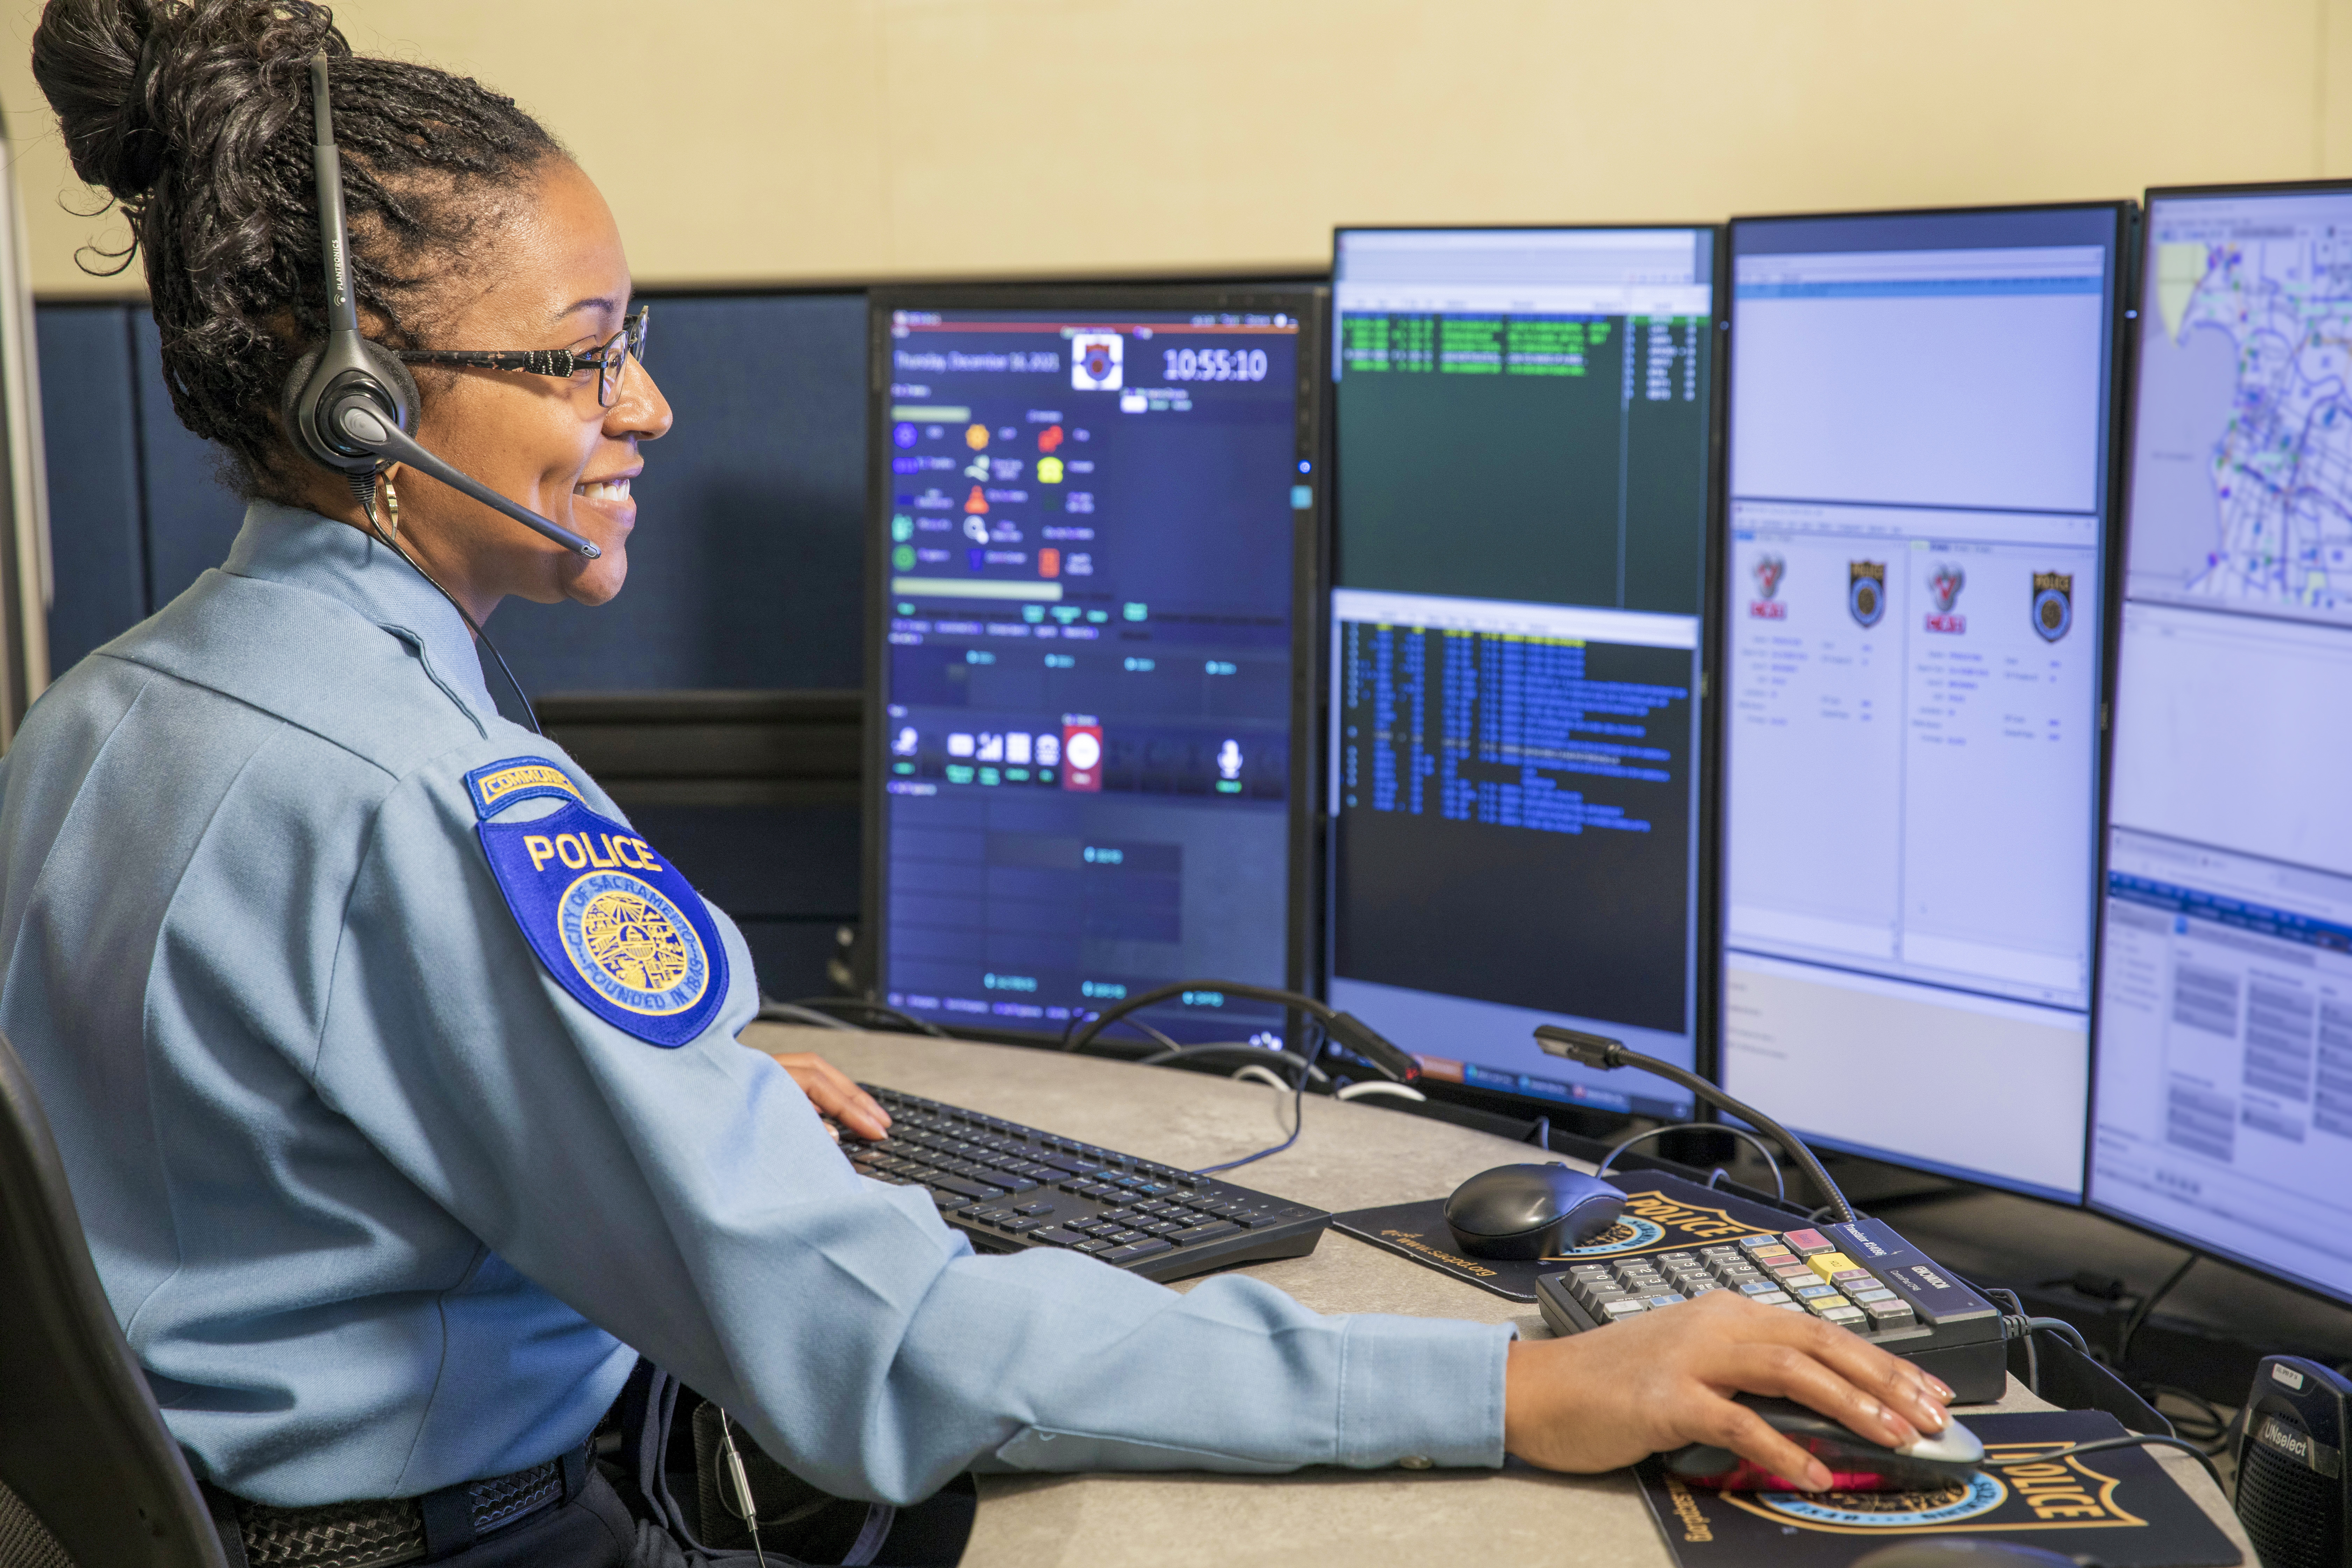 A photo of a Sacramento Police Department Dispatcher sitting at their workstation, with multiple screens mounted in front of them